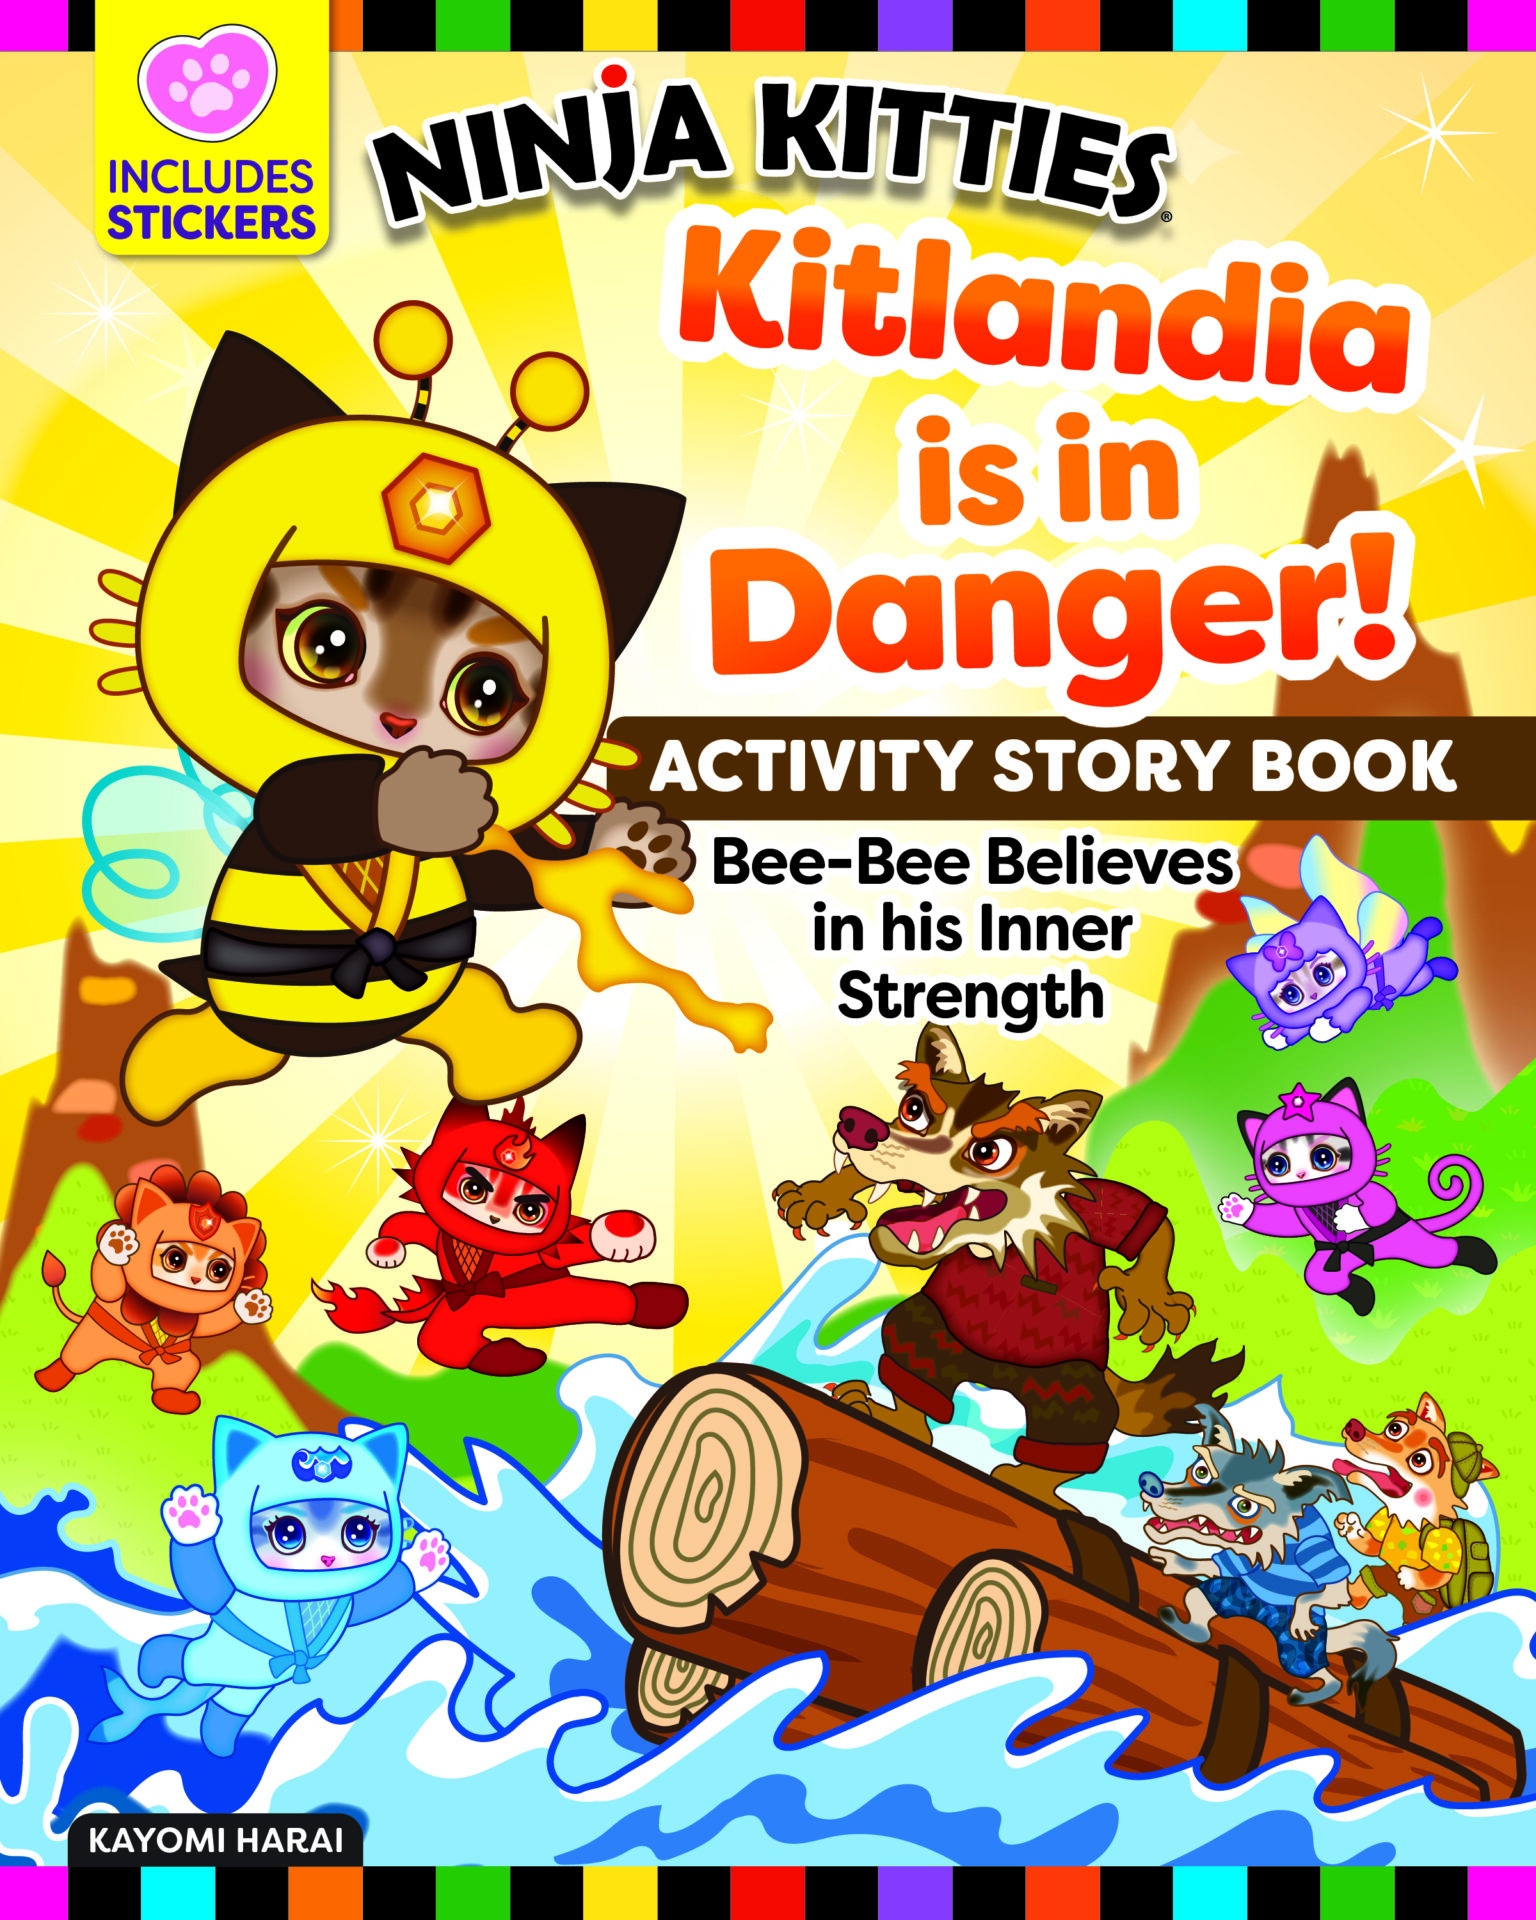 Kitlandia is in Danger Activity Story Book Cover